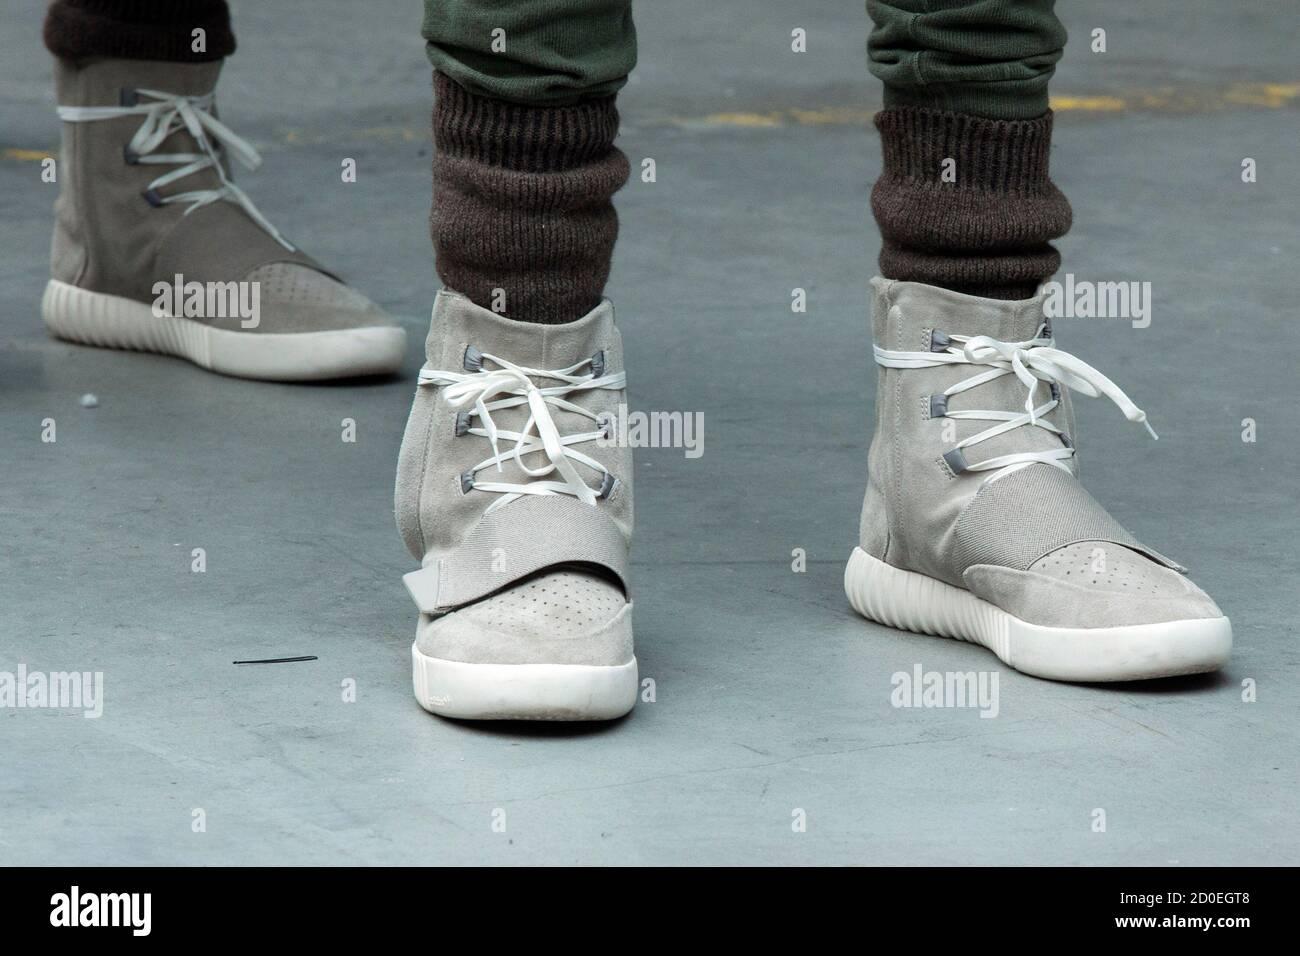 willekeurig combineren Prediken A model wears a pair of Adidas Yeezy 750 Boost shoes designed by Kanye West  as part of his Fall/Winter 2015 partnership line with Adidas at New York  Fashion Week February 12,